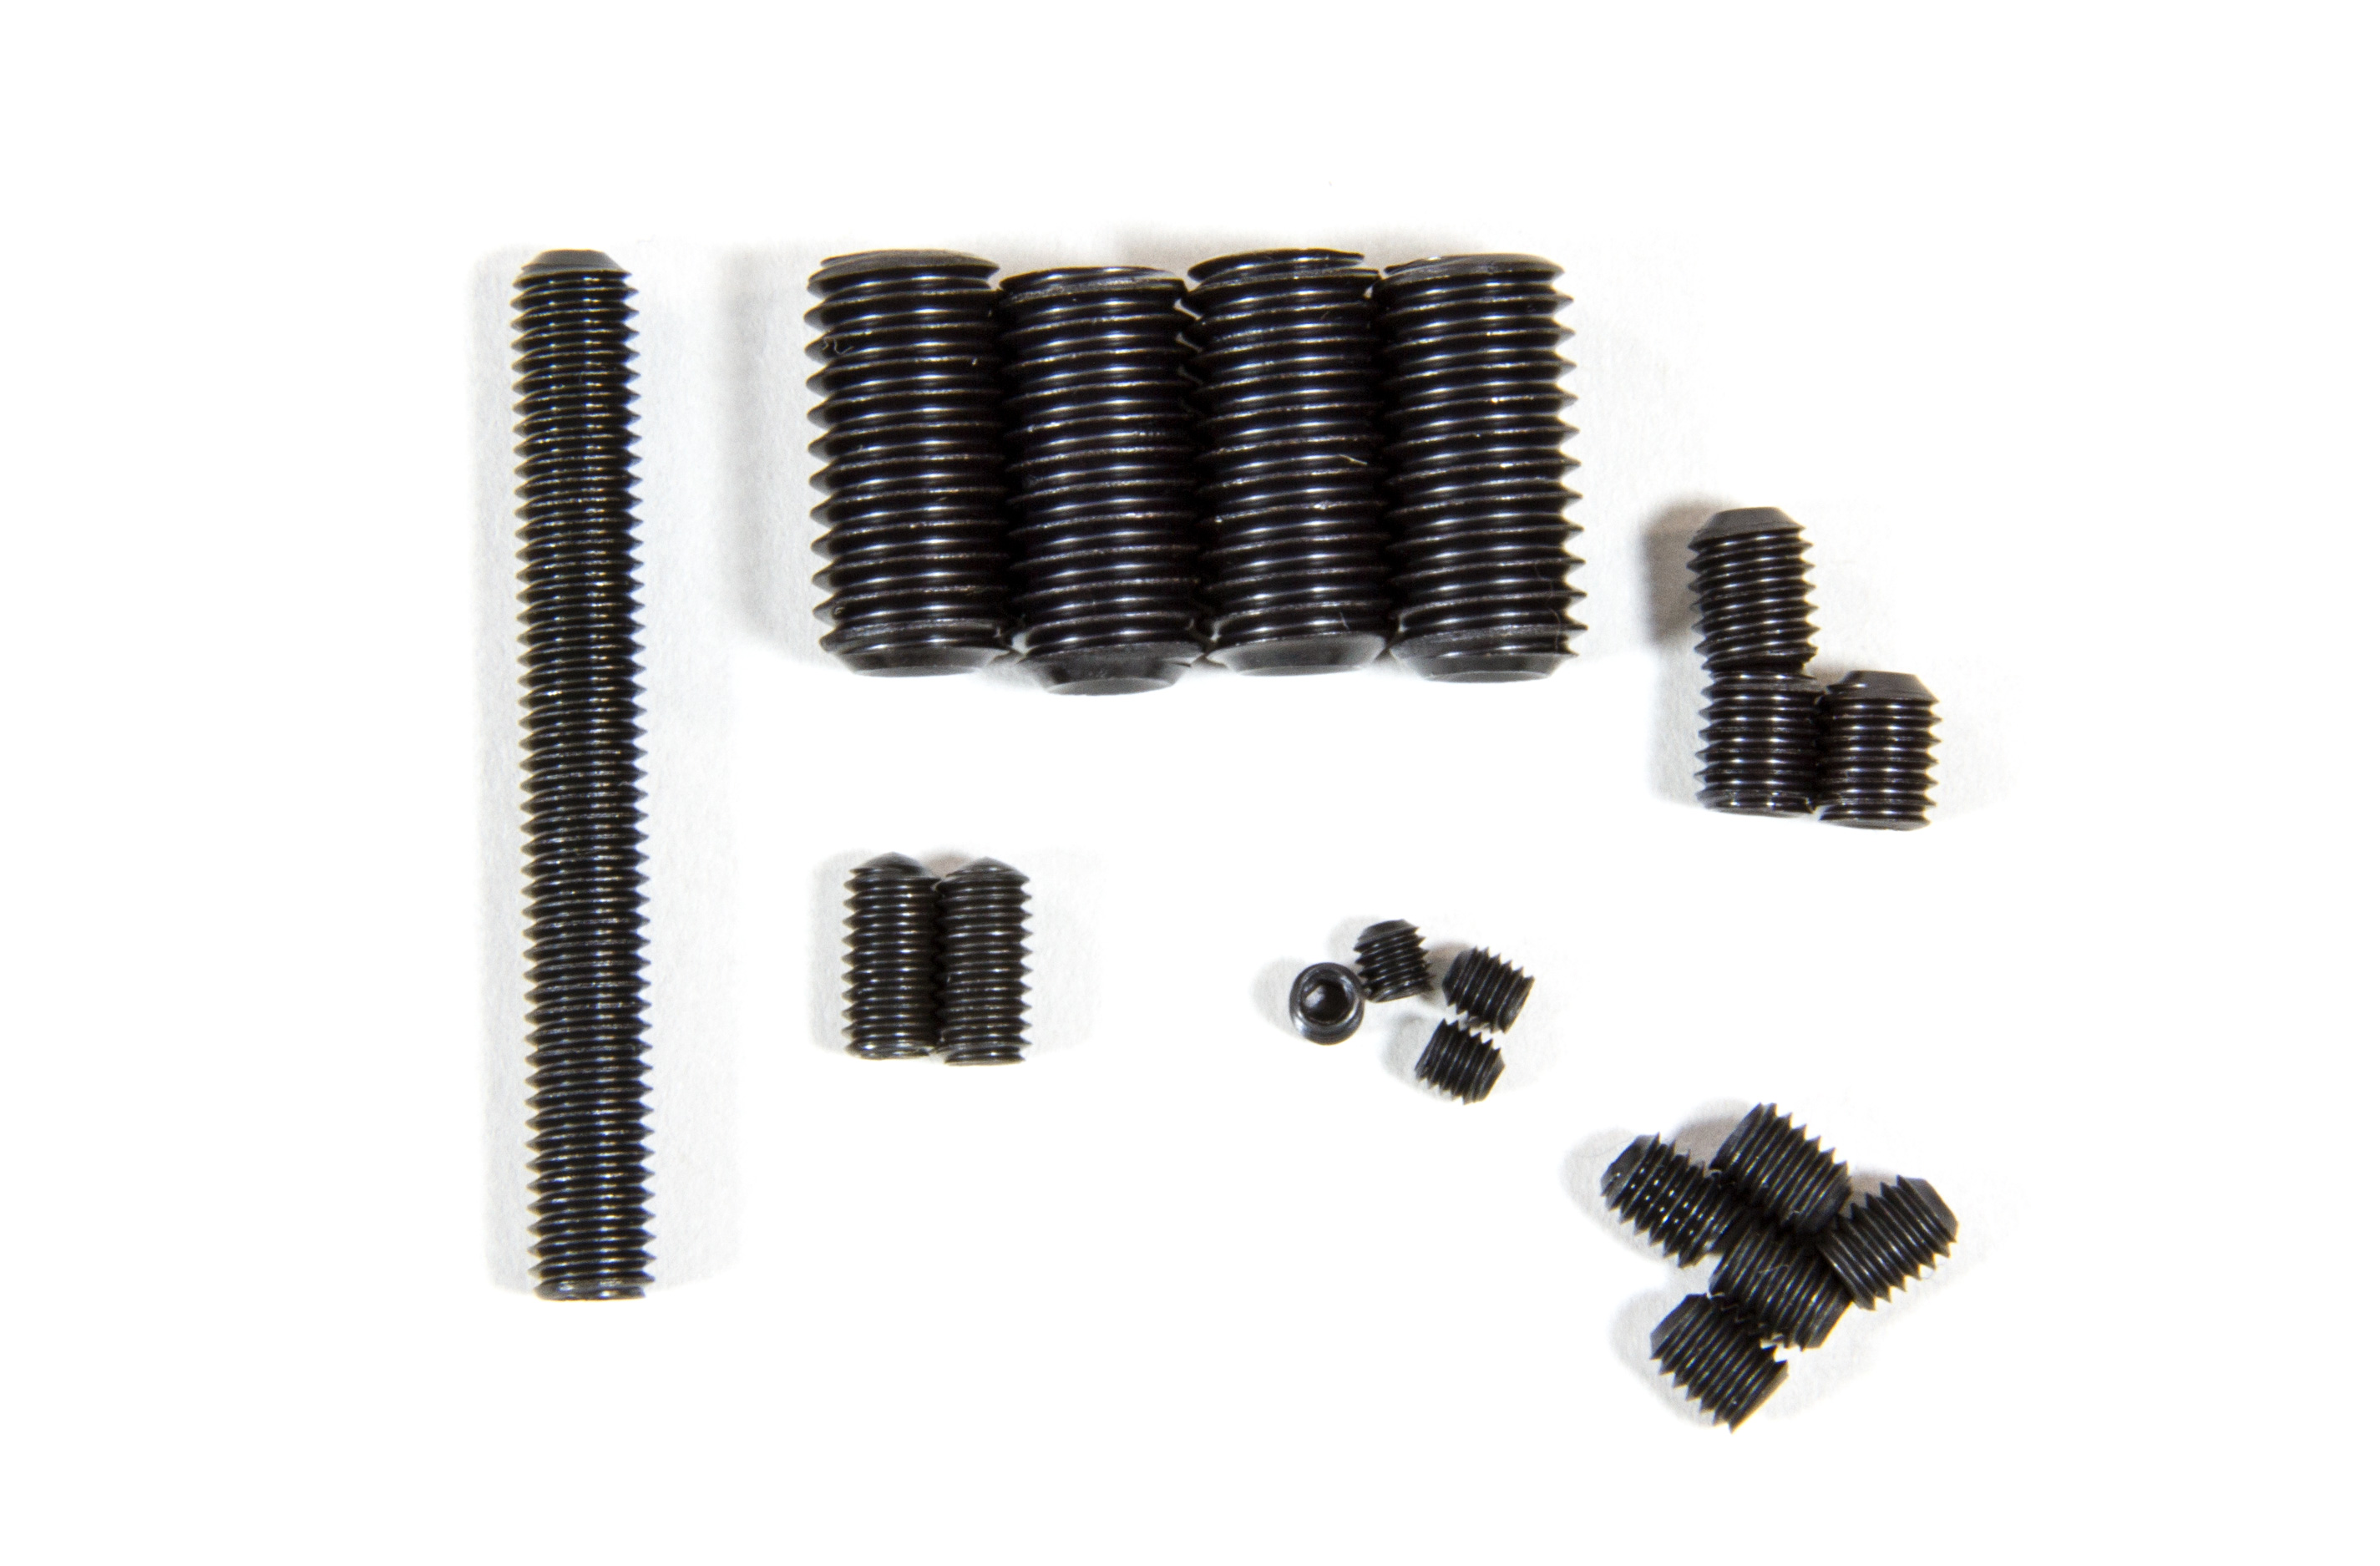 LOSB6501 Losi Set Screw Asst. 3,4,5 & 8mm 5ive-T, TLR 5ive-B and Mini WRC